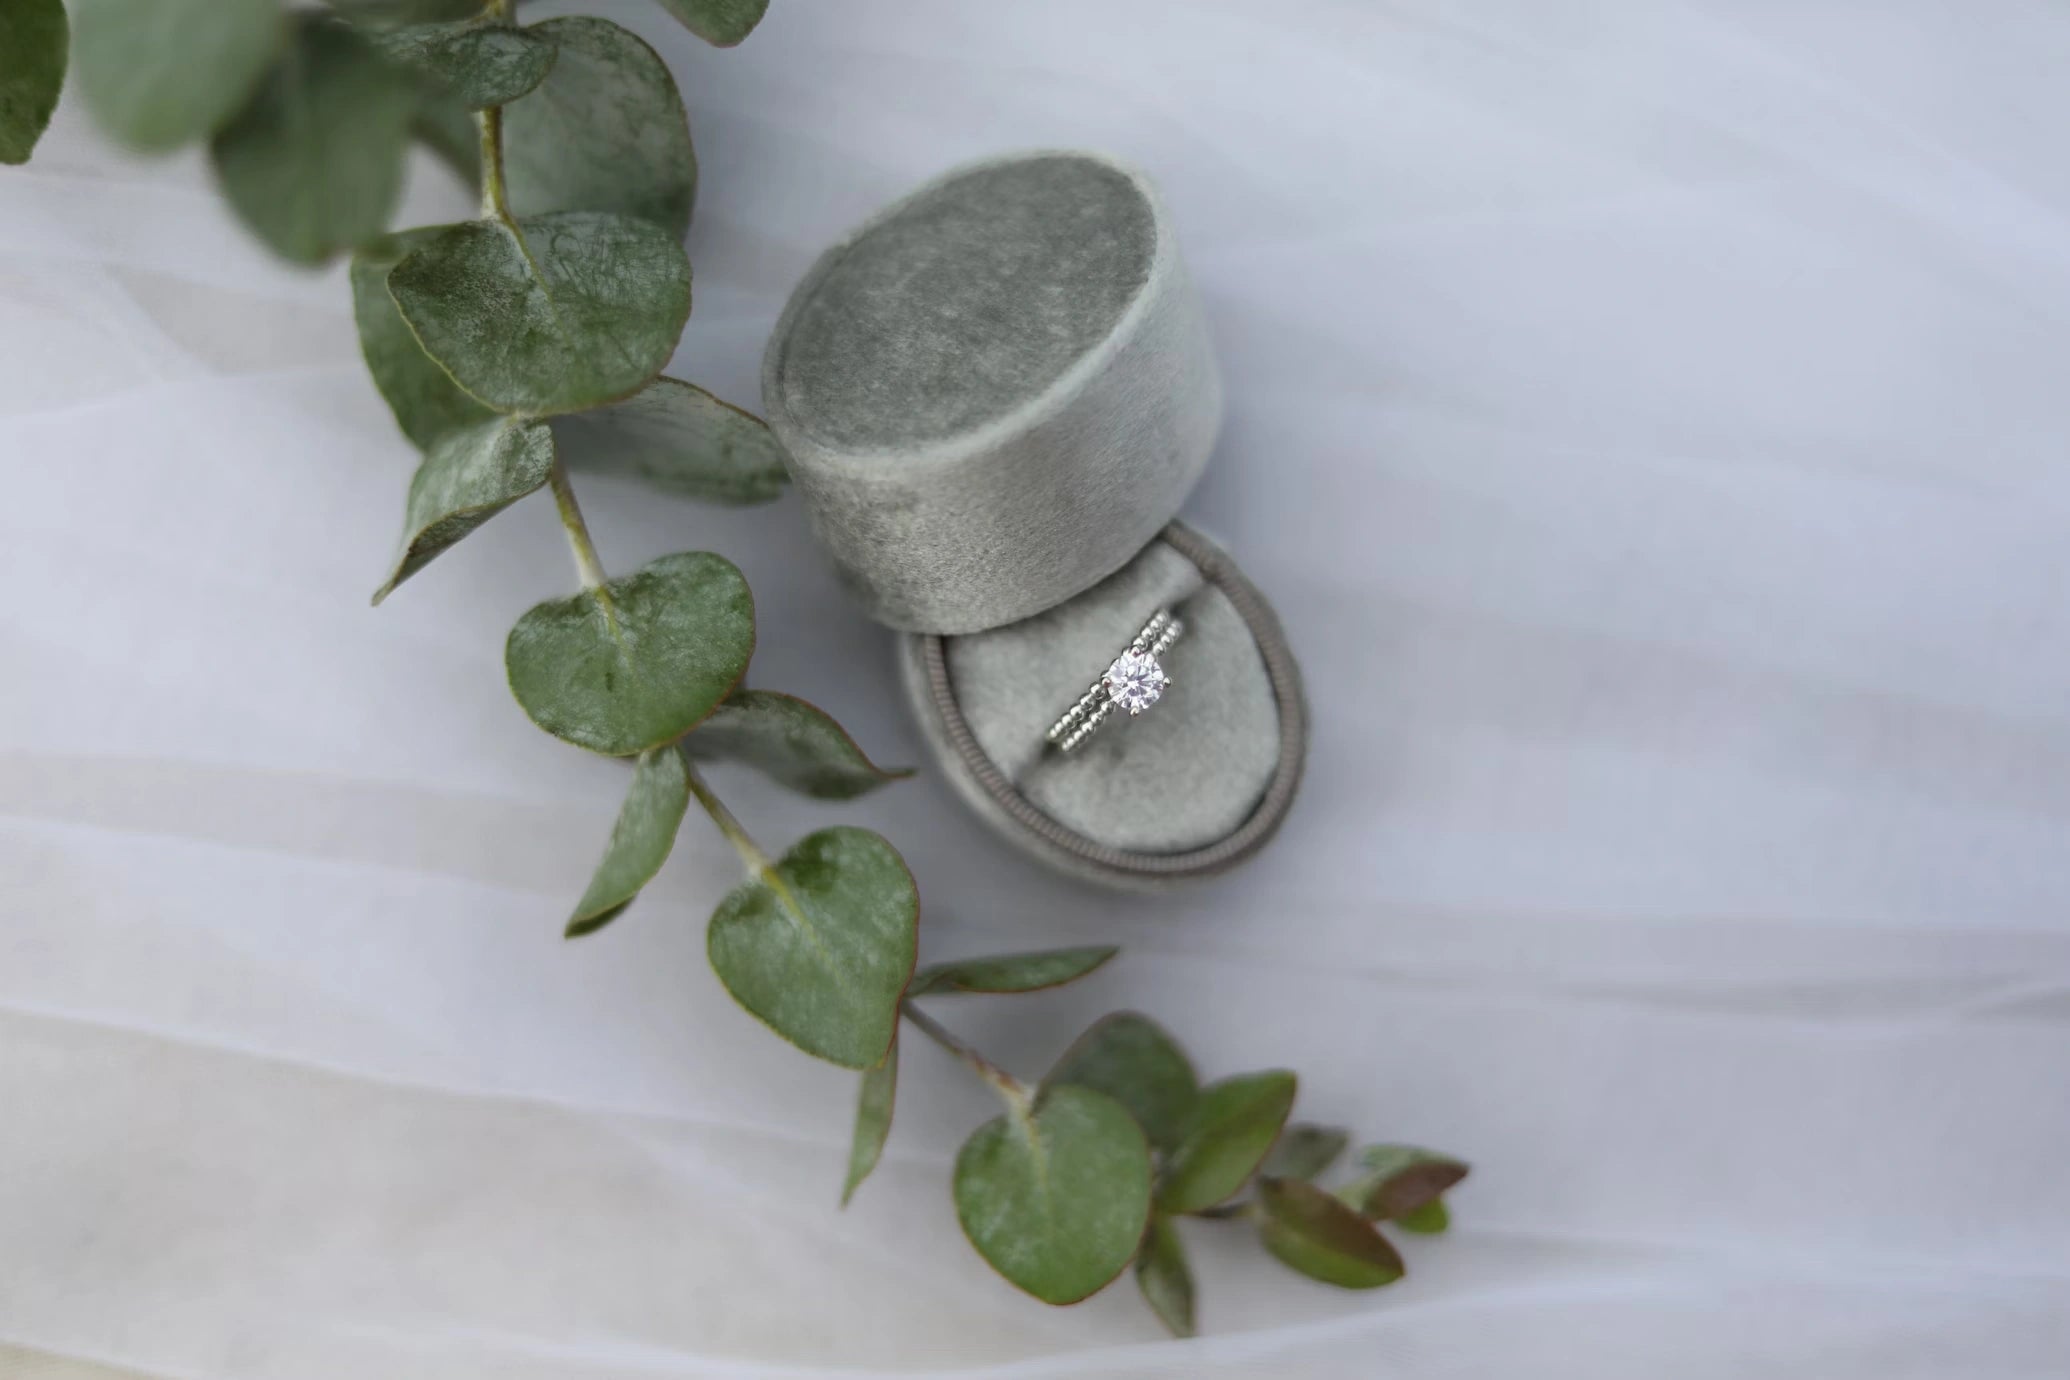 Engagement ring placed inside the opened ring box and placed besides the leaves branch